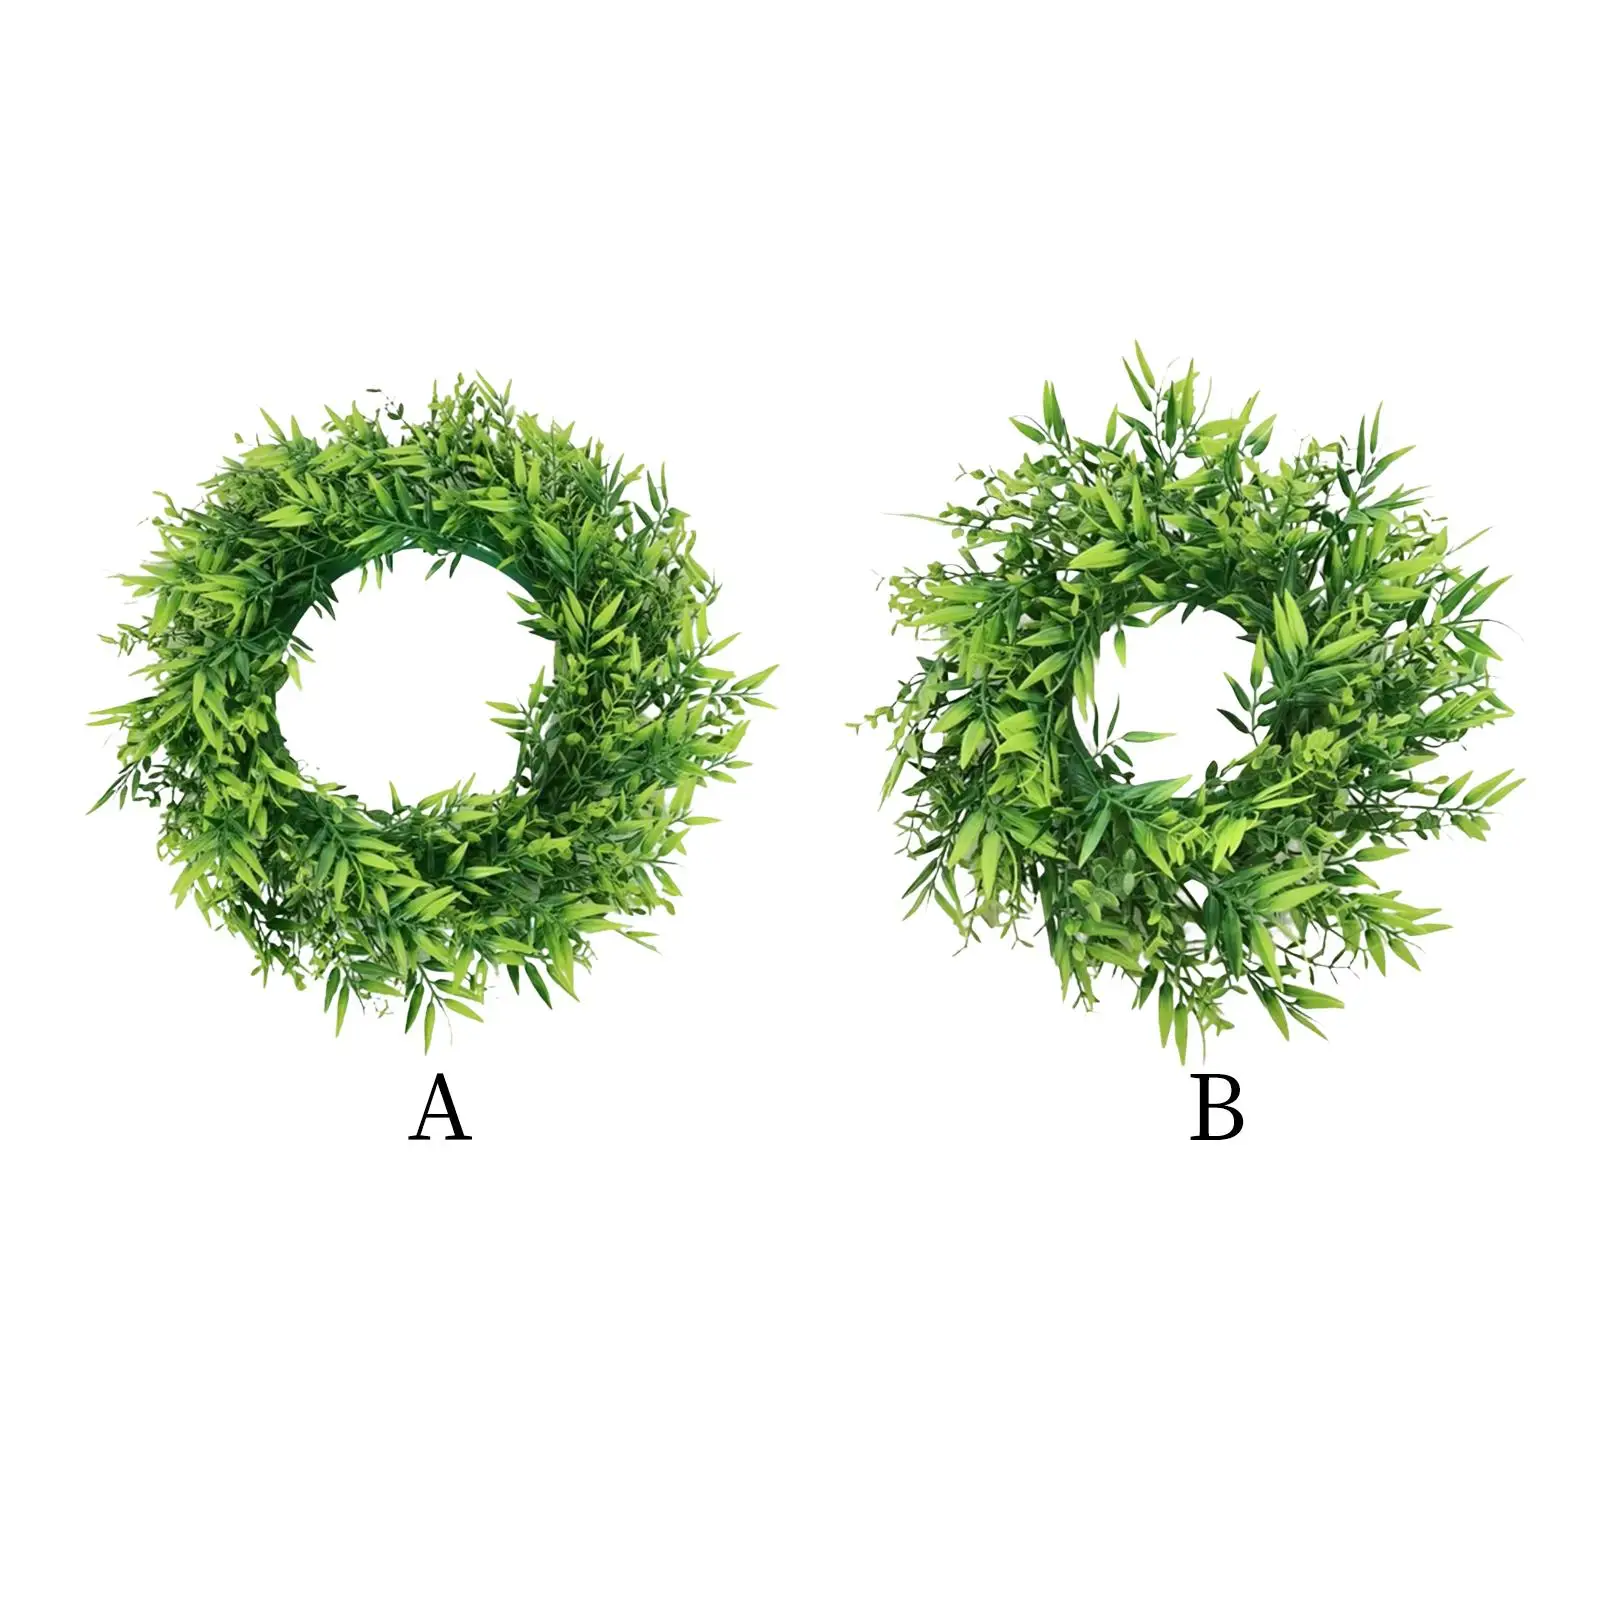 Vivid Artificial Wreath Green Leaves Farmhouse Wreath Wall Greenery for Front Door Outdoor All Seasons Celebration Home Decor